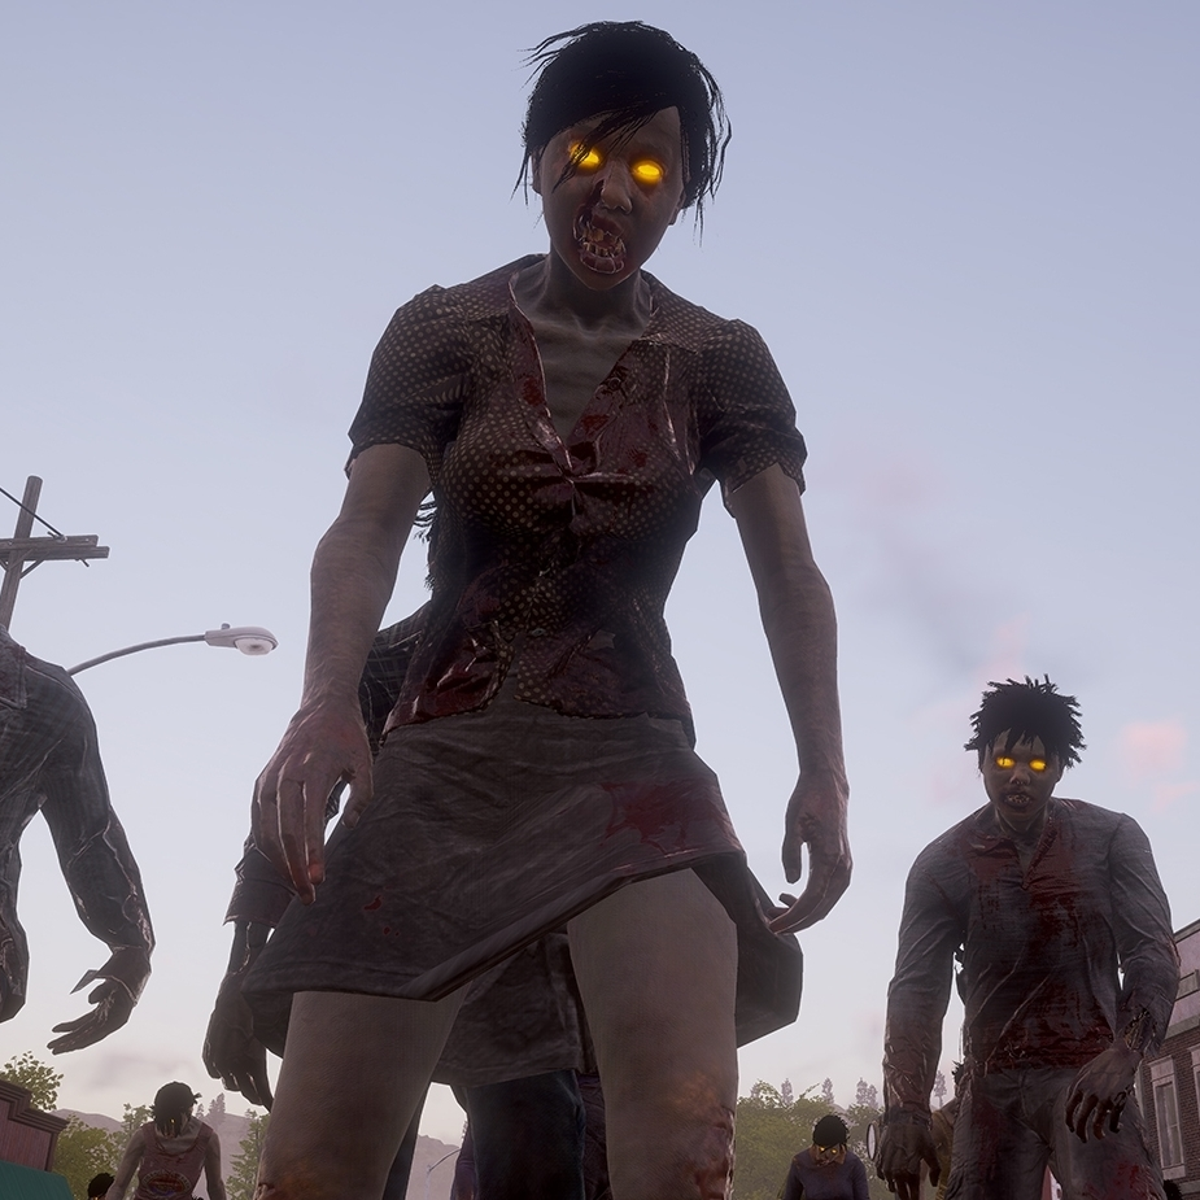 State of Decay 2's multiplayer zombie survival heading to Steam next year